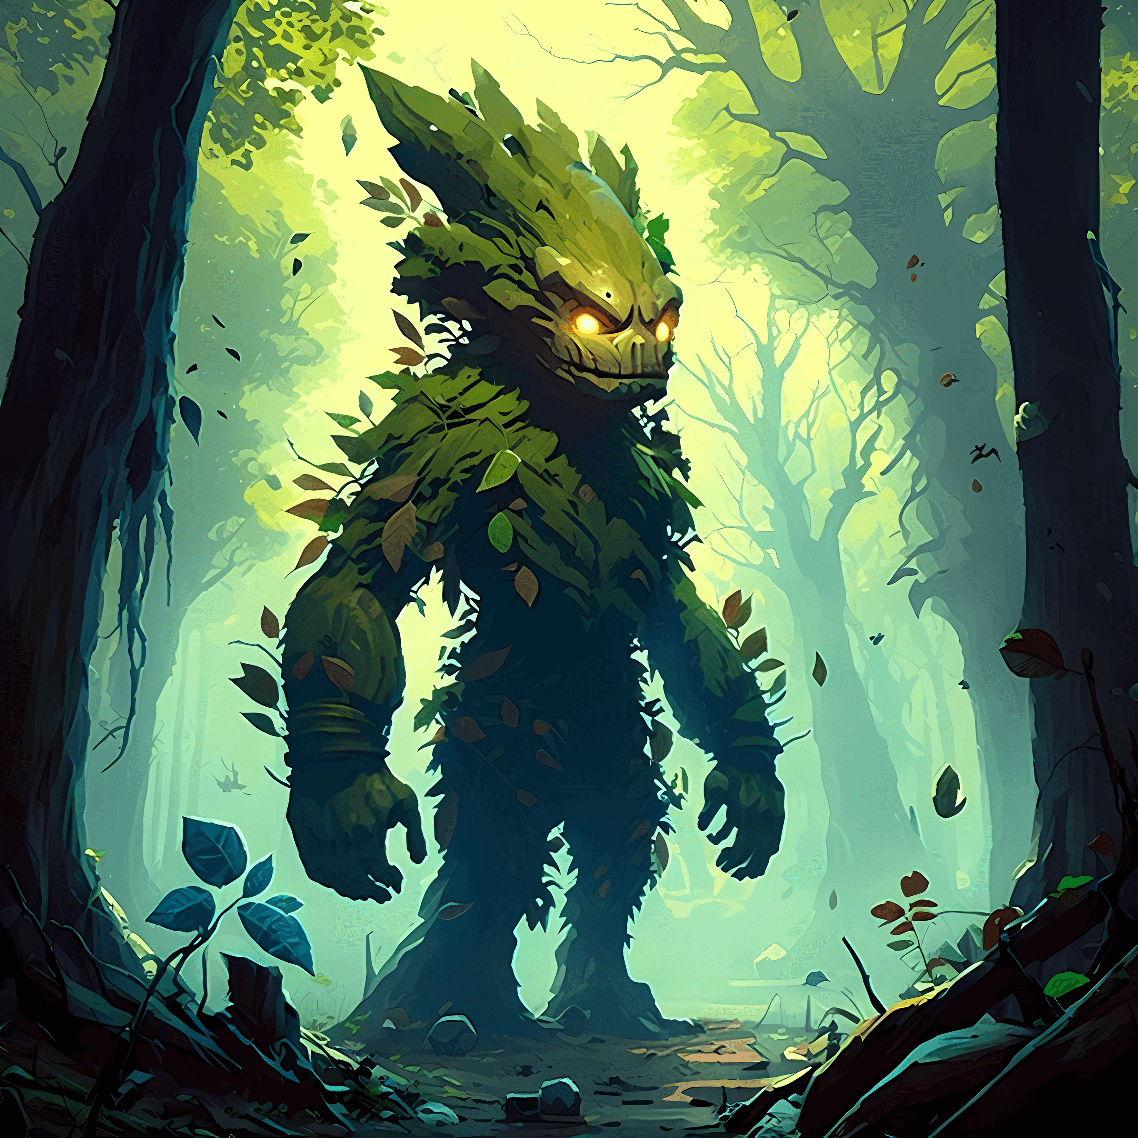 Tredier - The Forest Colossus